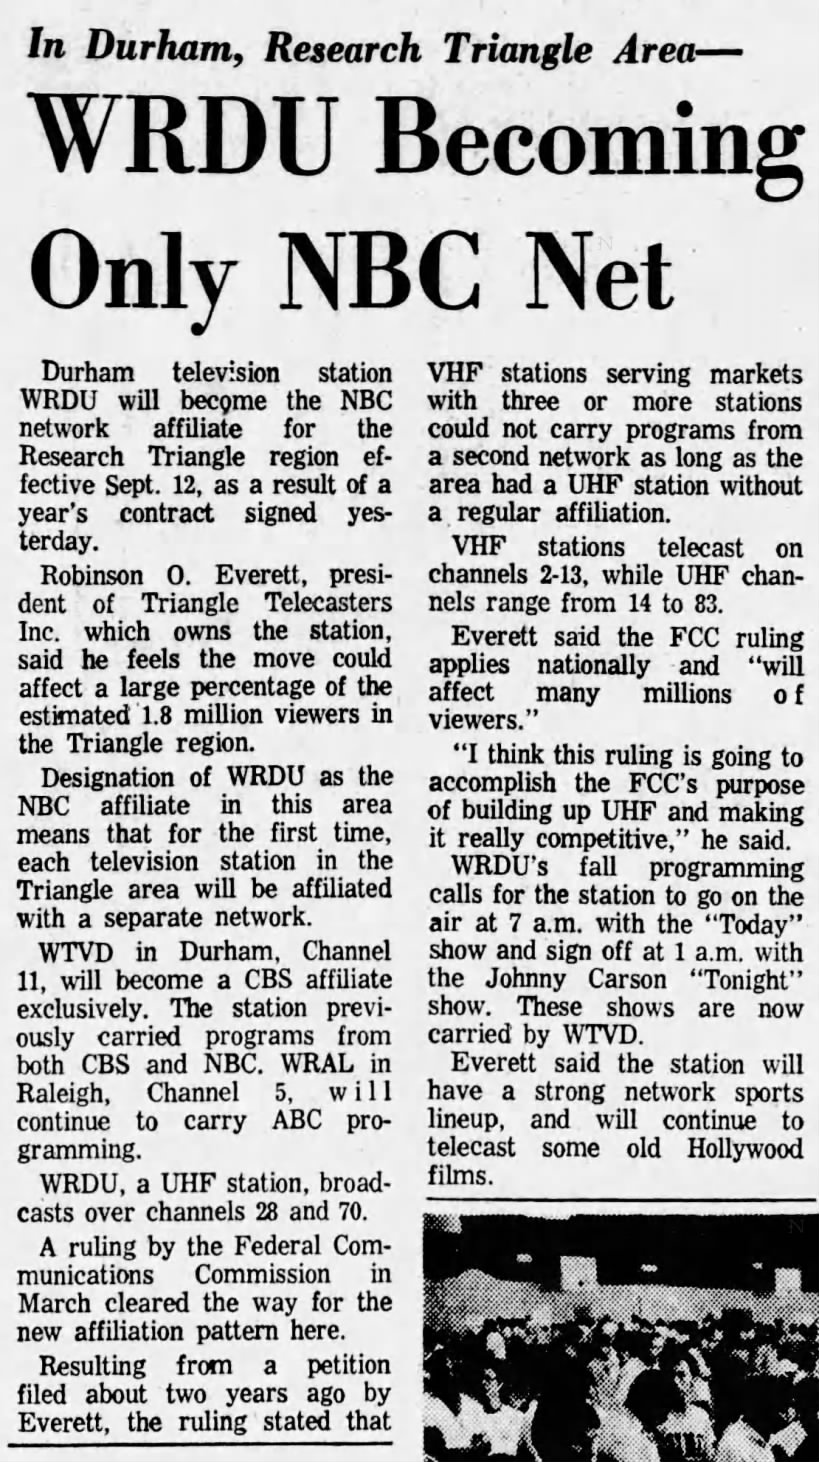 In Durham, Research Triangle Area—WRDU Becoming Only NBC Net